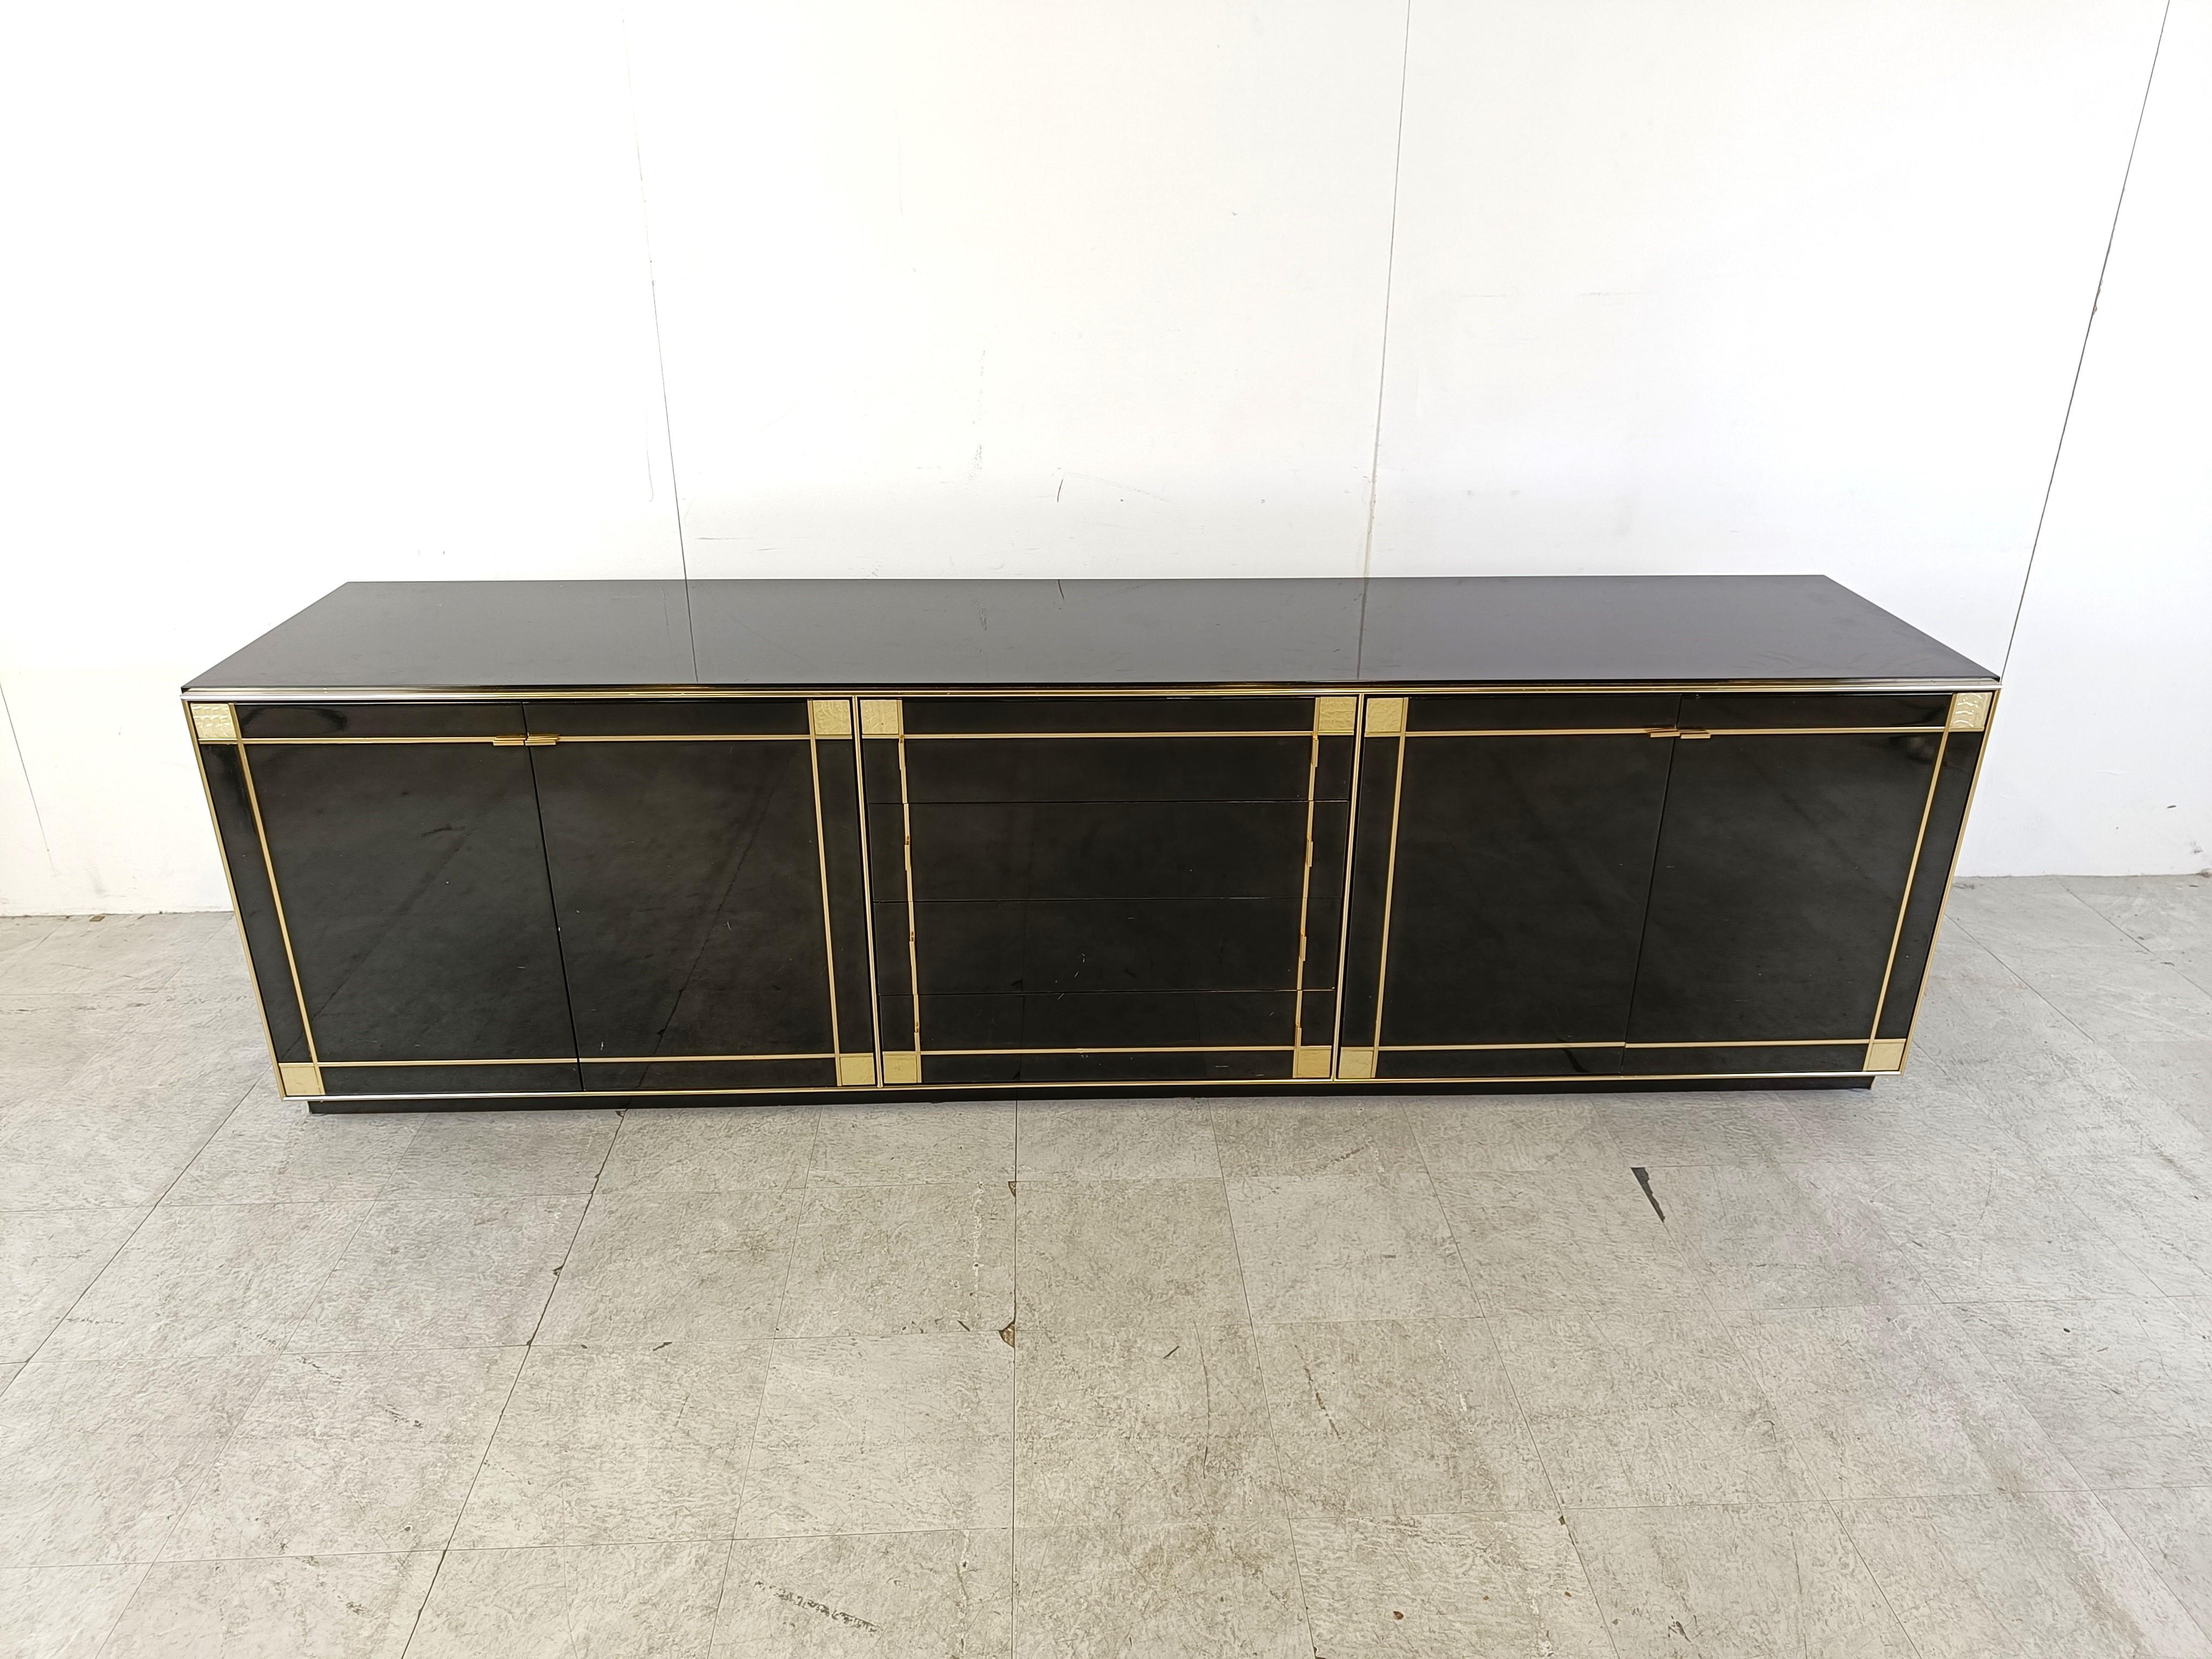 Luxurious black lacquer, mother of pearl and brass sideboard by Pierre Cardin for Roche Bobois consisting of 4 doors and 4 drawers offering plenty of storage space.

The brass lines which frame the sideboard create a nice contrast with the black